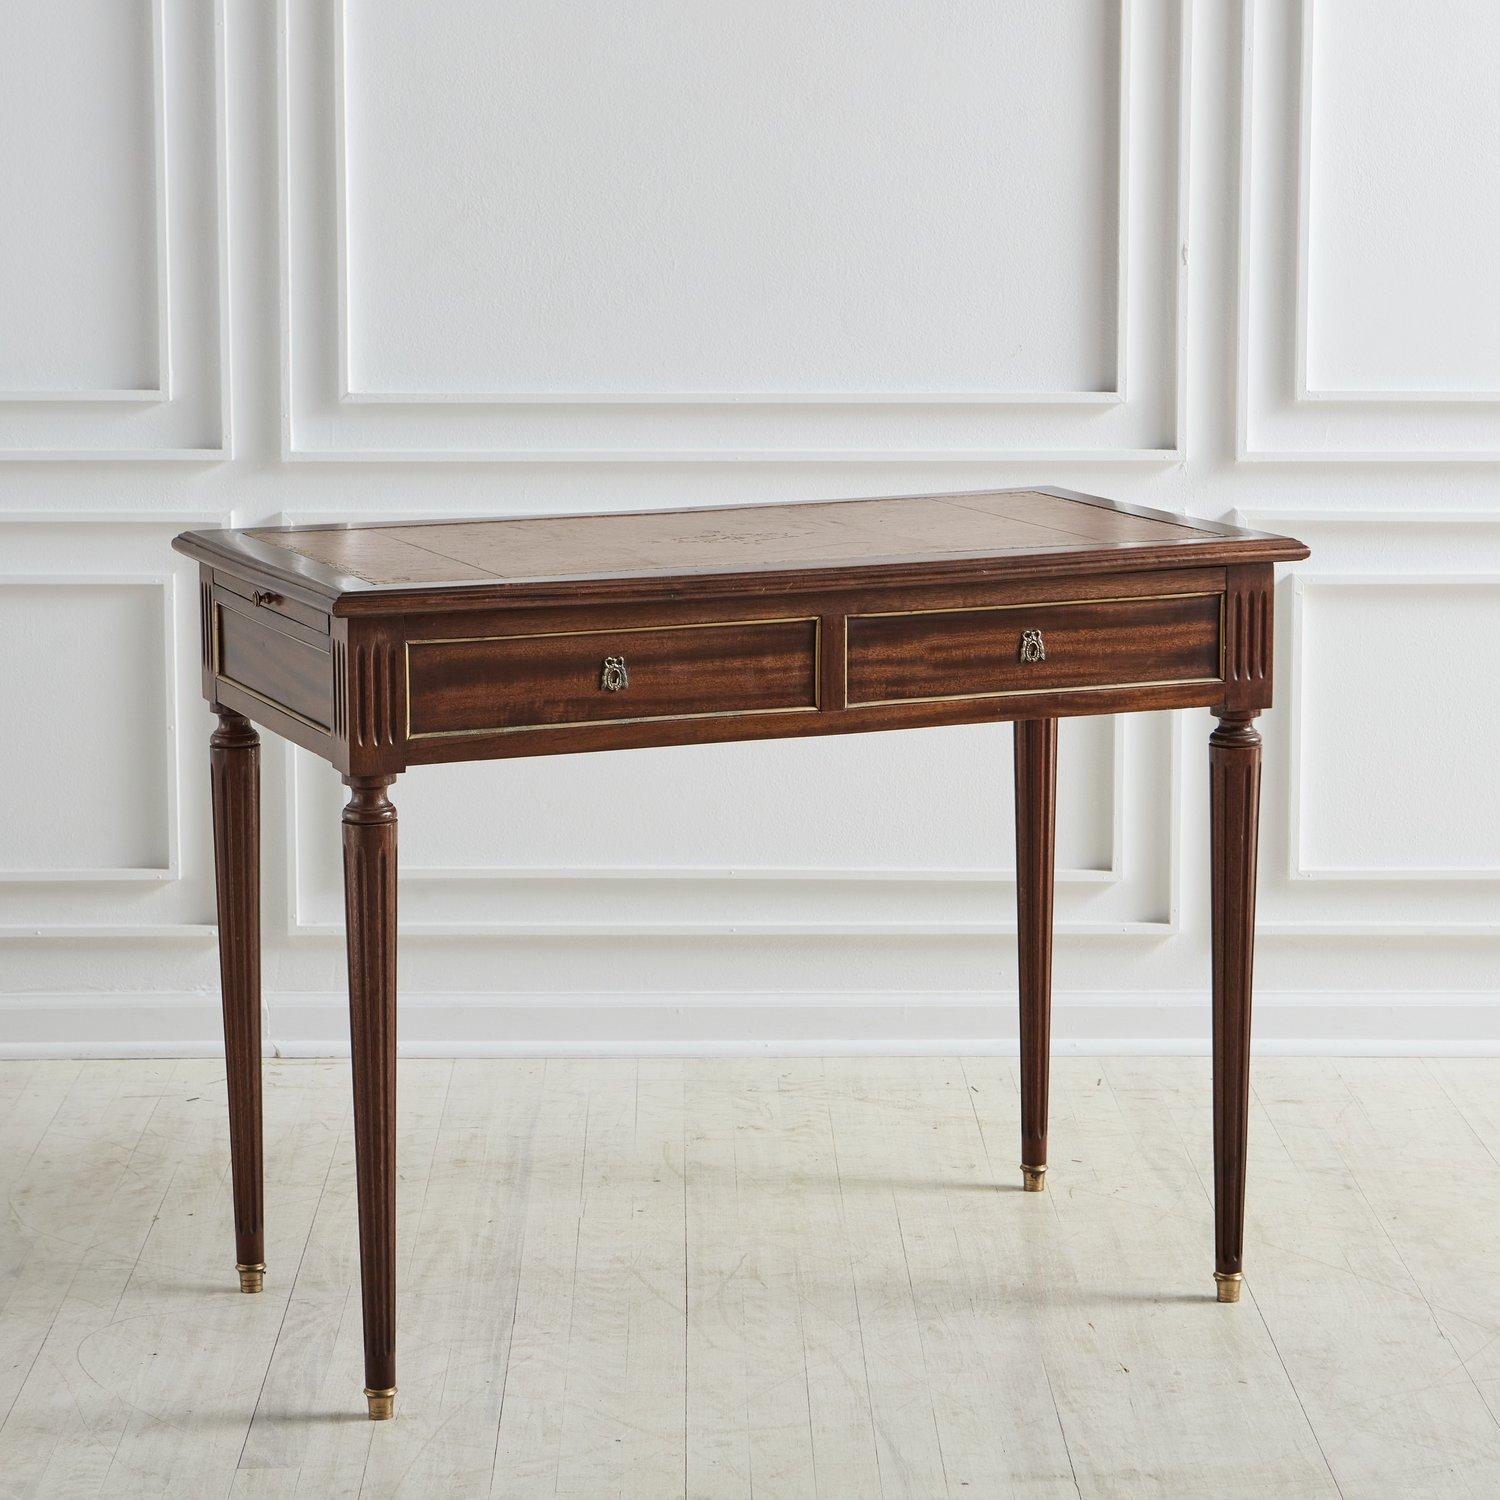 A gorgeous Louis XVI style writing desk constructed with mahogany. This desk has a rectangular tabletop with two leaves that pull out for additional surface space. It features an inset cognac leather top with intricate, hand-applied gold leaf